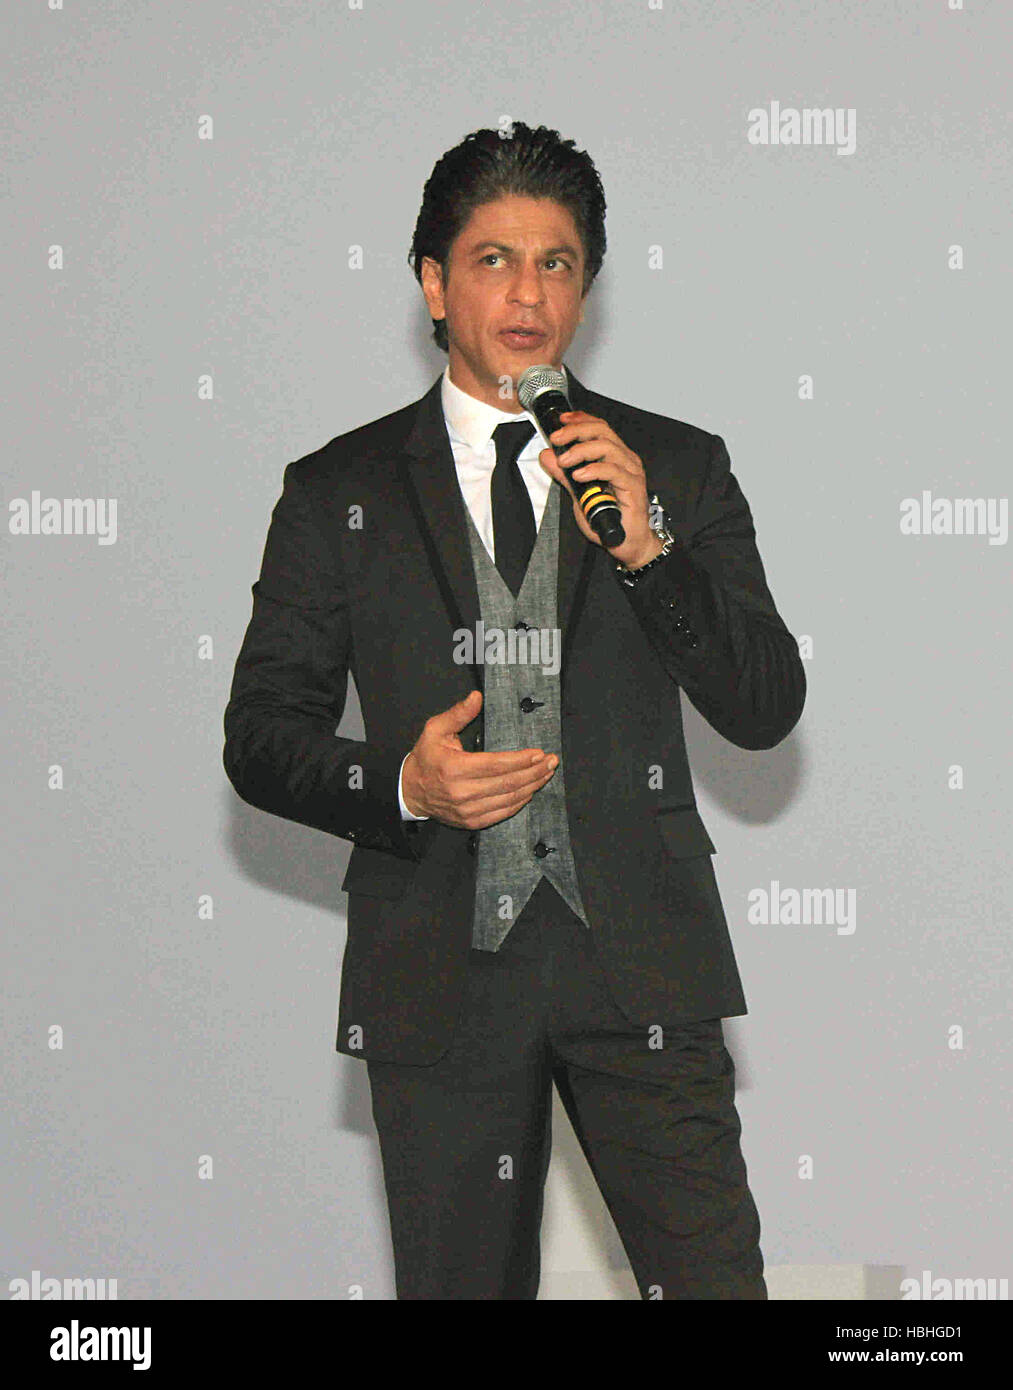 Sharukh Khan speaking on microphone, Indian Bollywood actor as brand ambassador of D'Decor launch ceremony, Mumbai, India Stock Photo